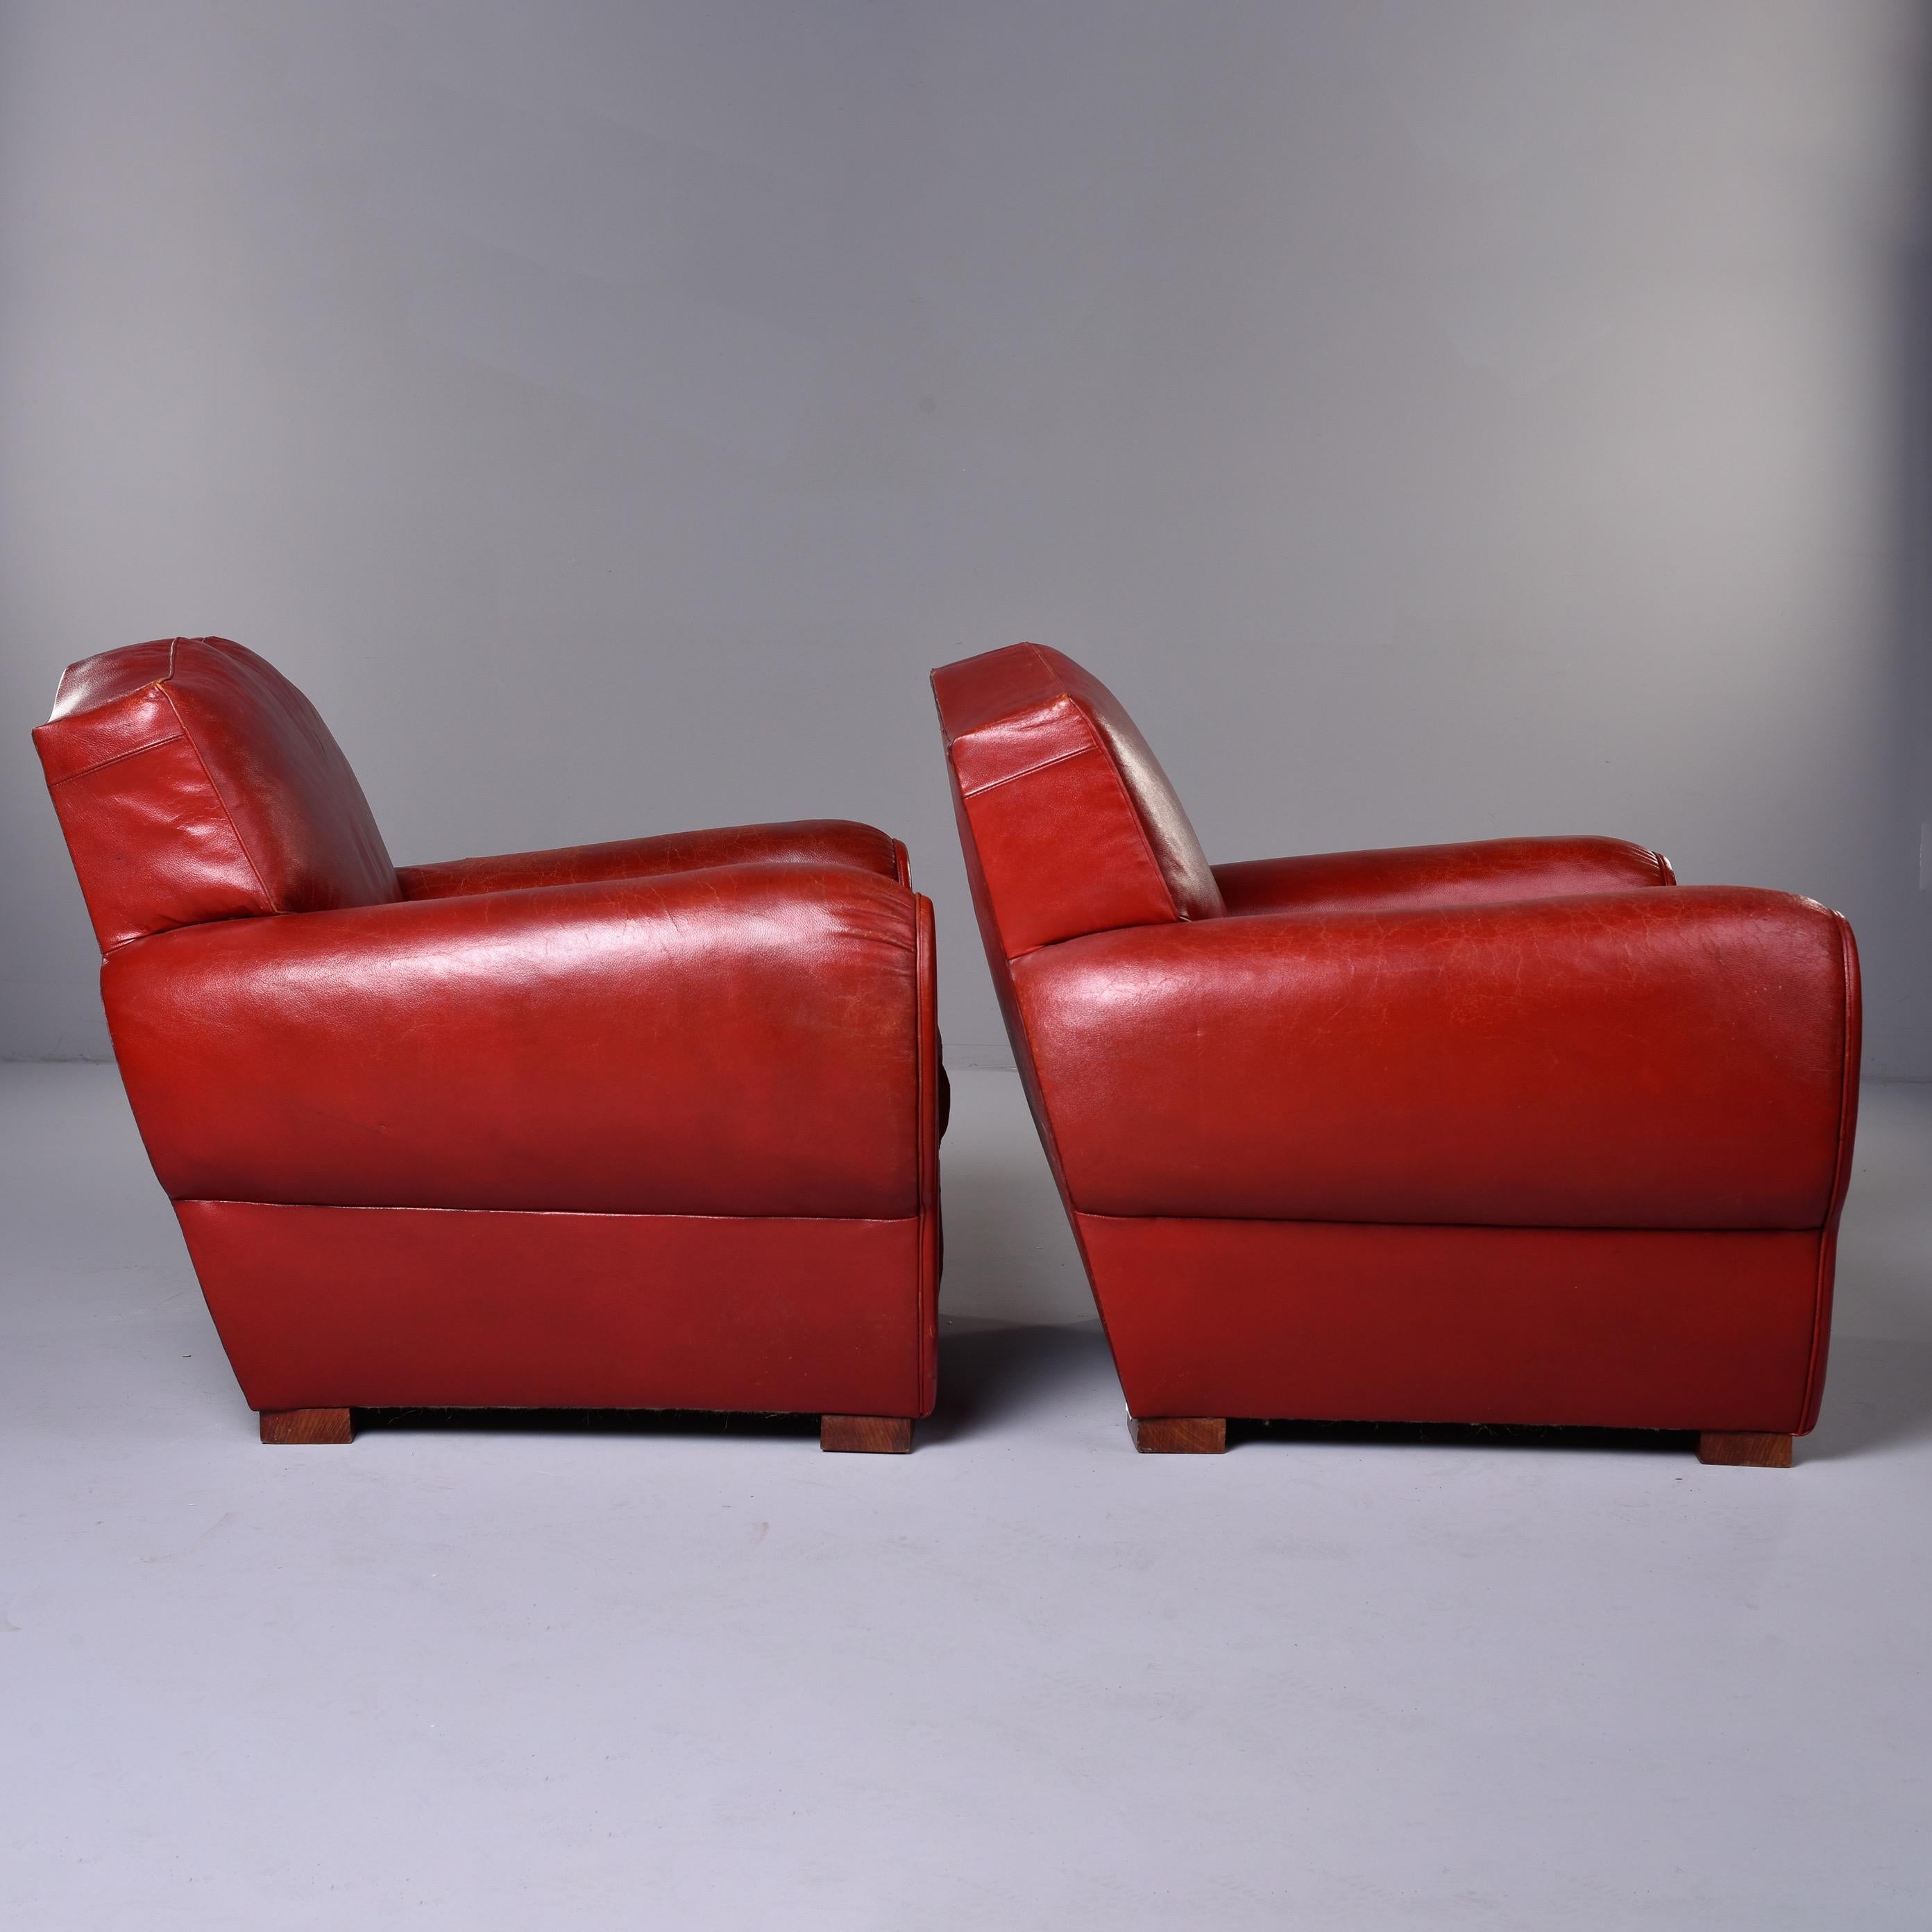 Pair of Vintage Art Deco Style Red Leather Club Chairs with Mustache Back 3